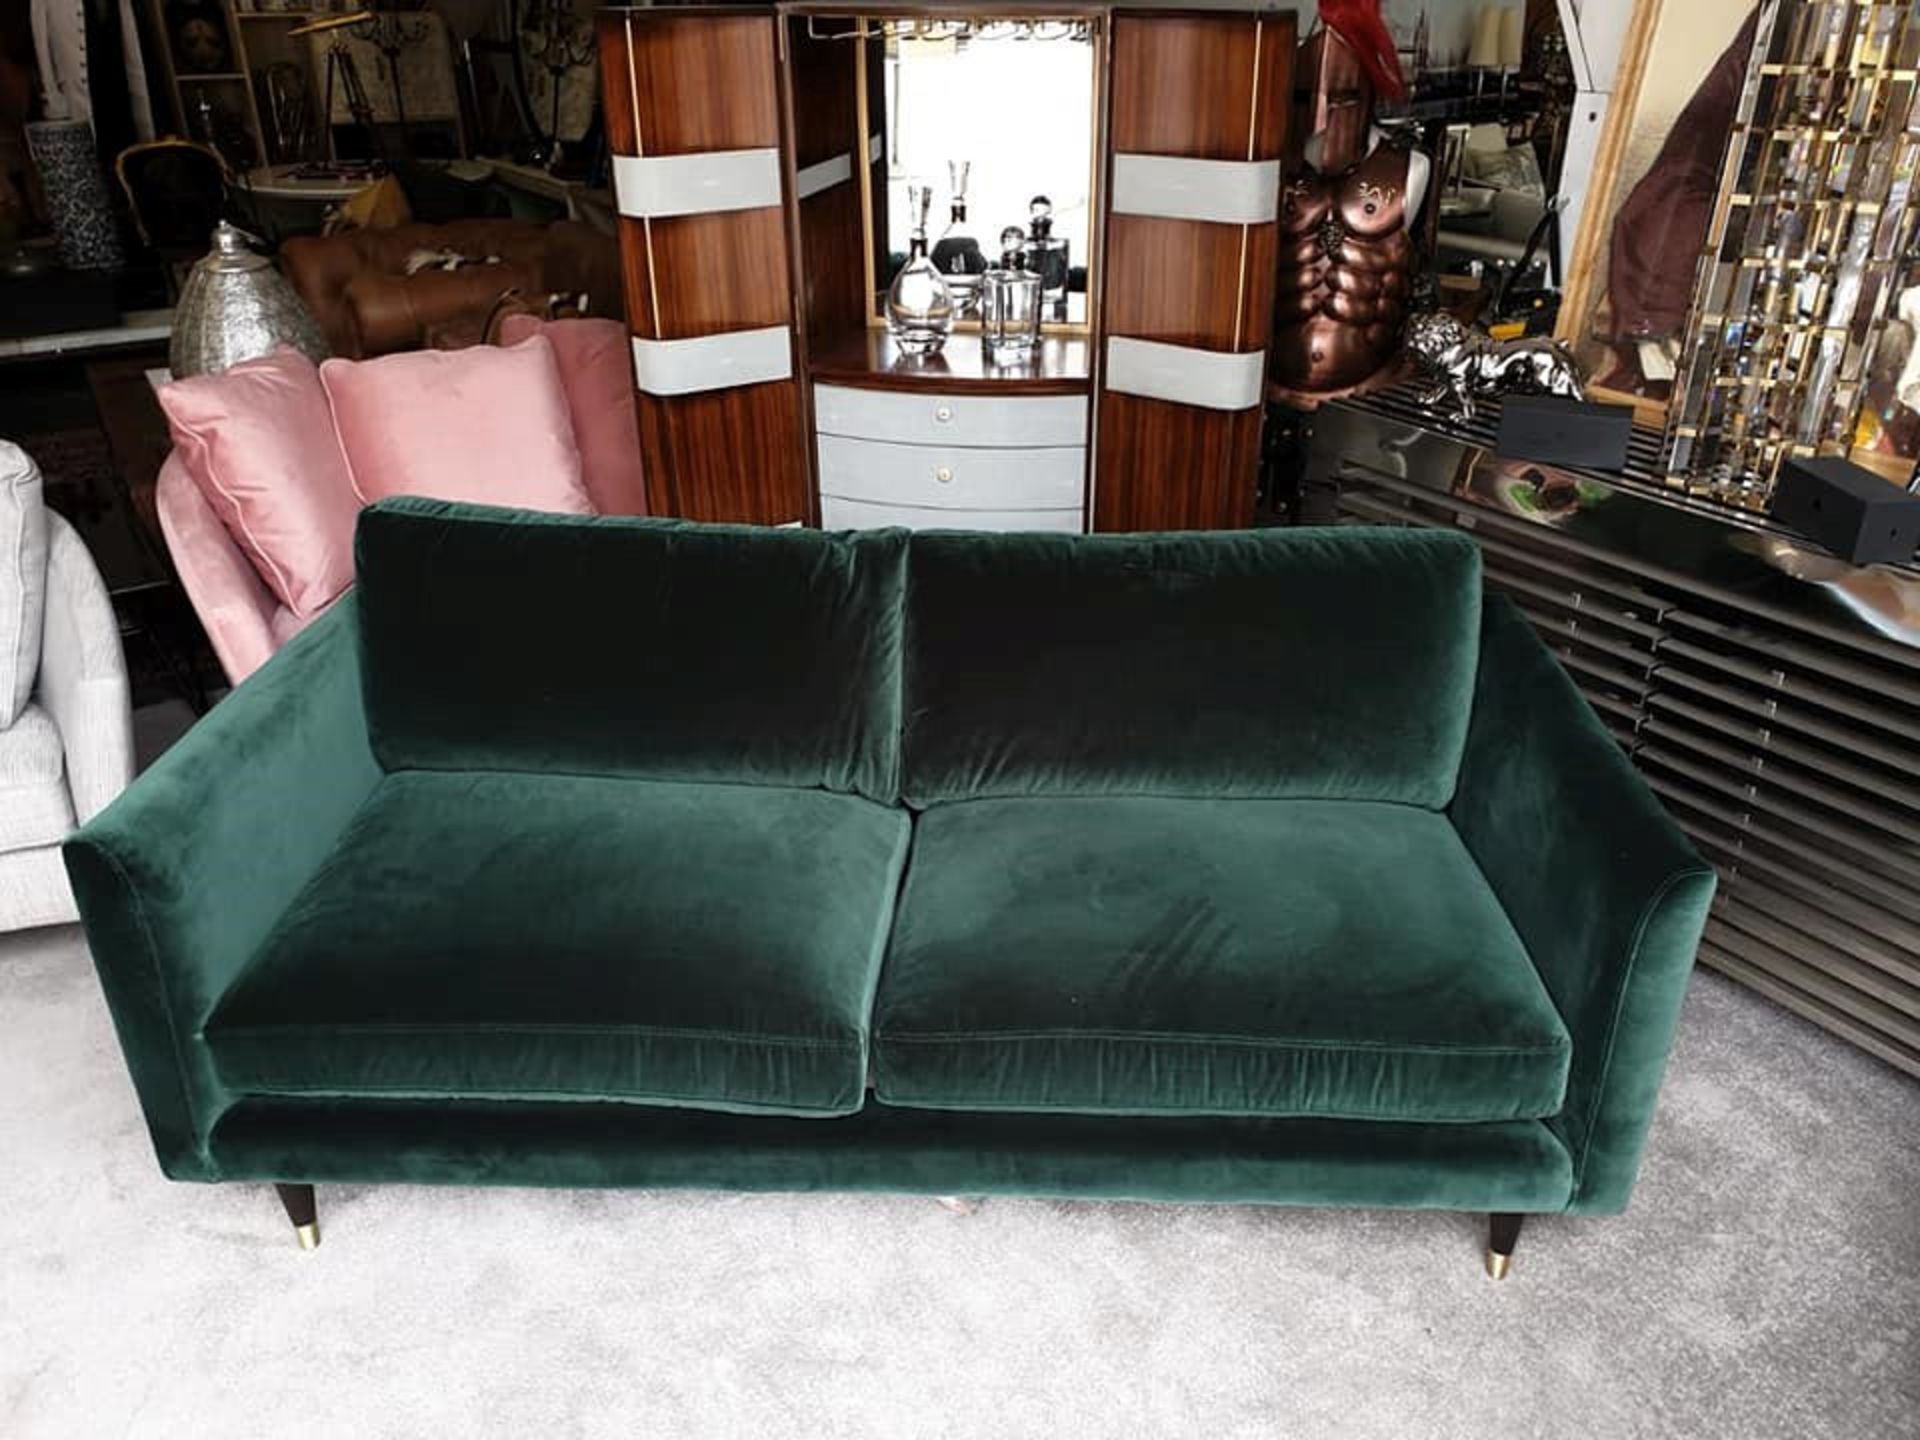 Henry 3 Seater Velvet Sofa - Emerald Green Henry By Christiane Lemieux Is A Contemporary Sofa With